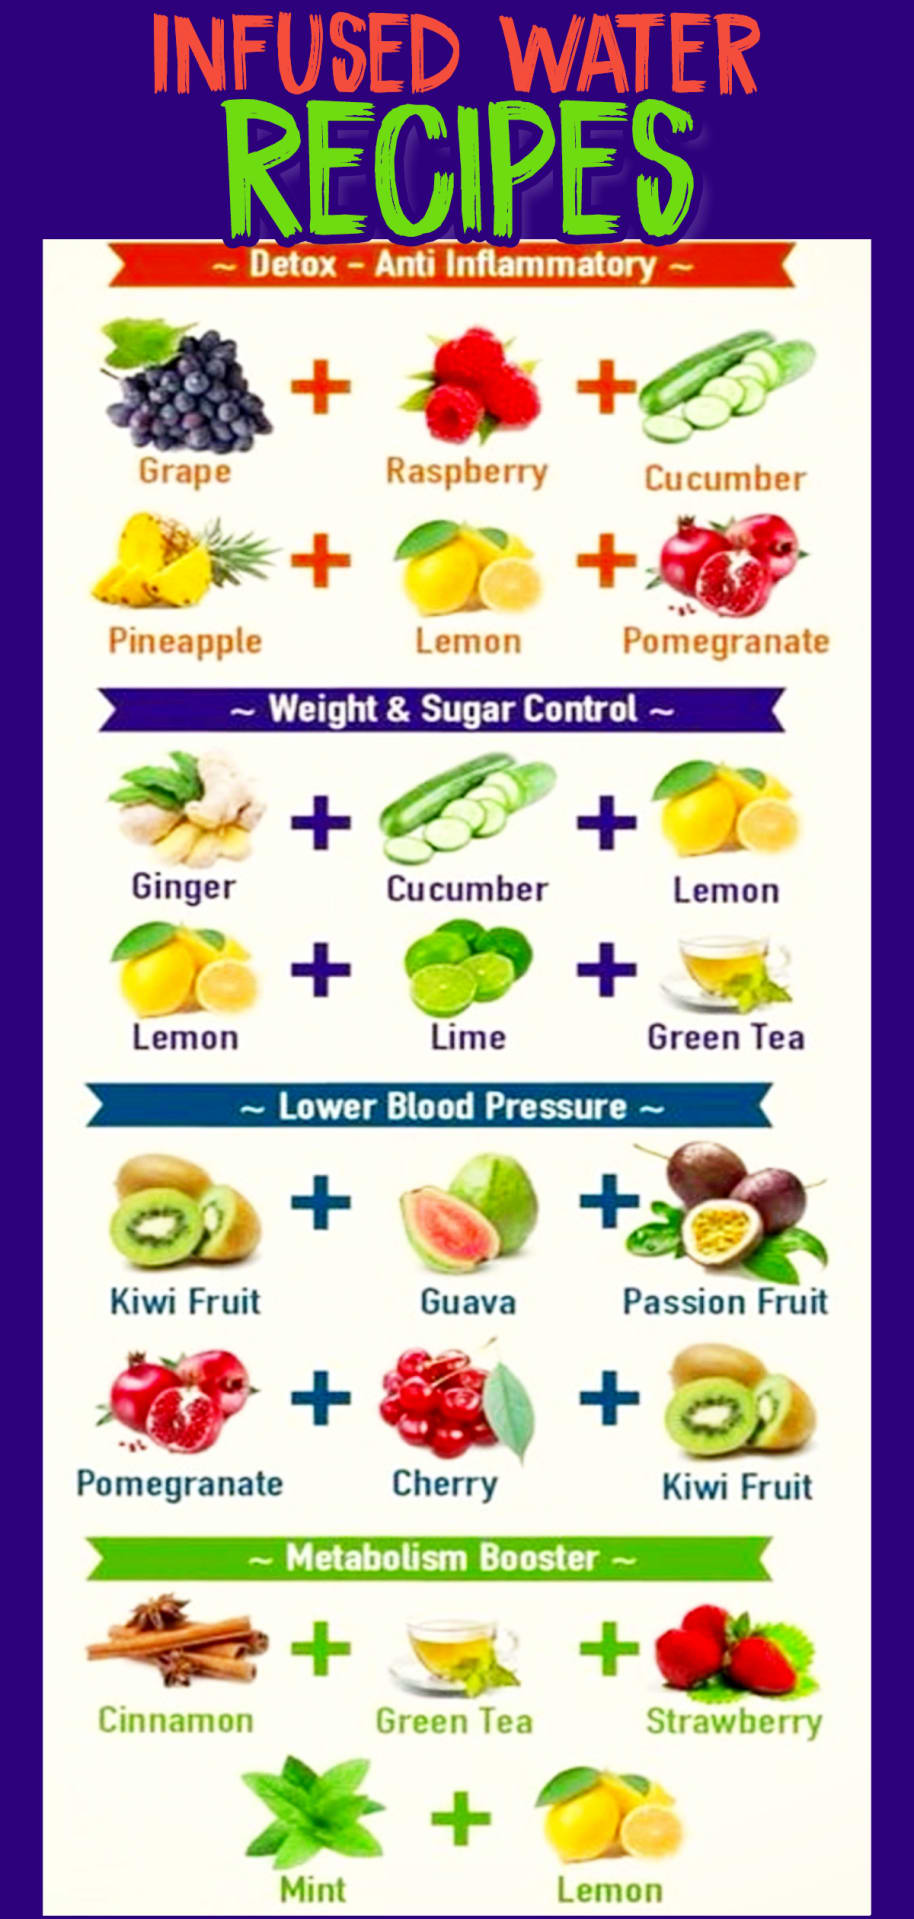 Infused Water Recipes And Benefits How To Make Fruit Infused